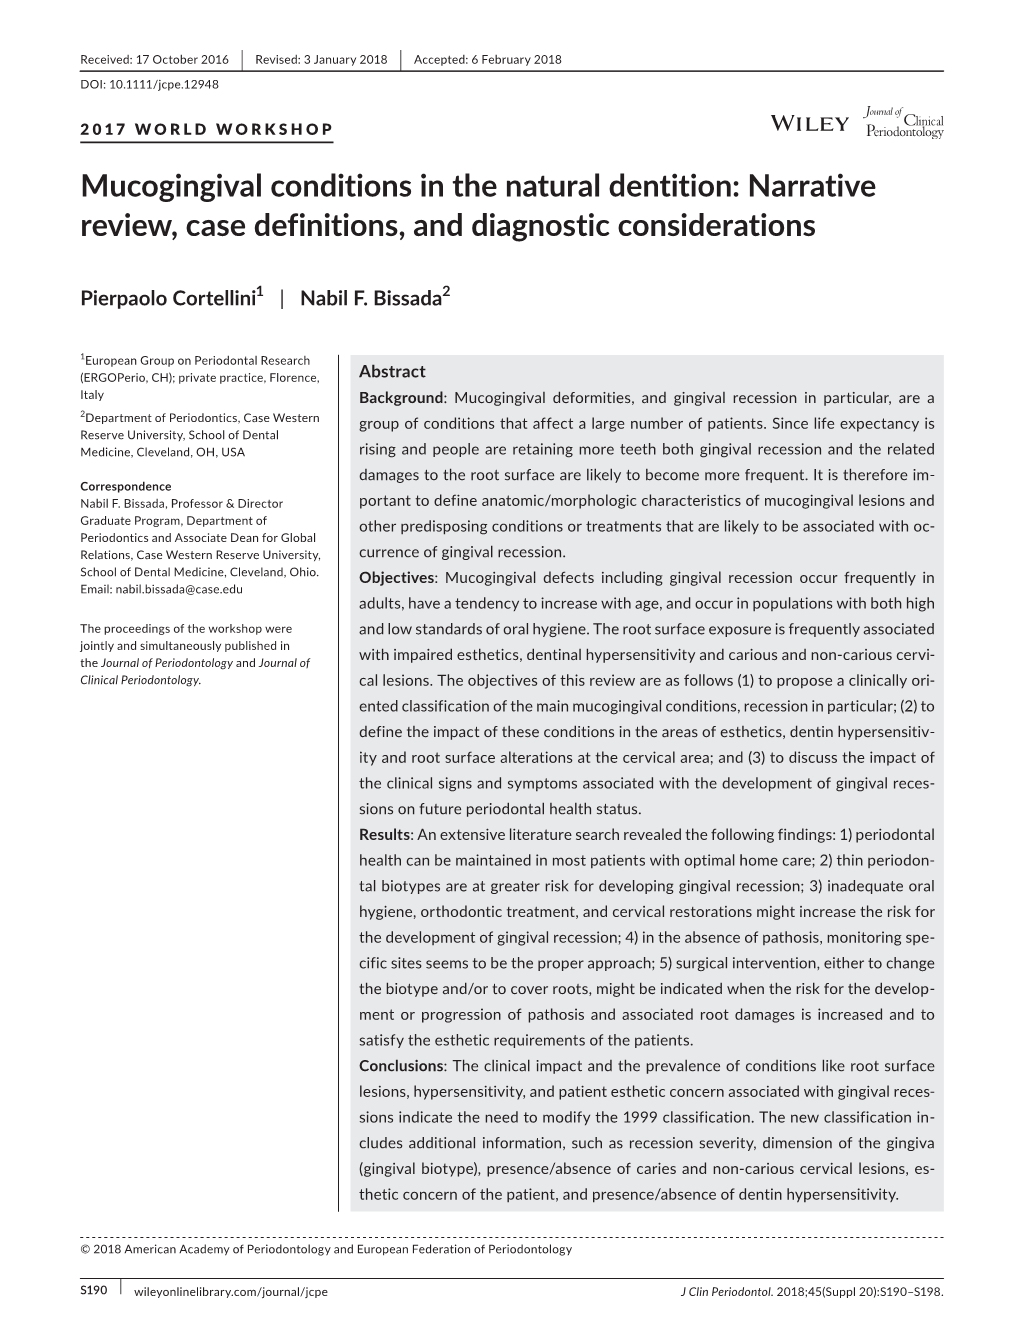 Mucogingival Conditions in the Natural Dentition: Narrative Review, Case Definitions, and Diagnostic Considerations